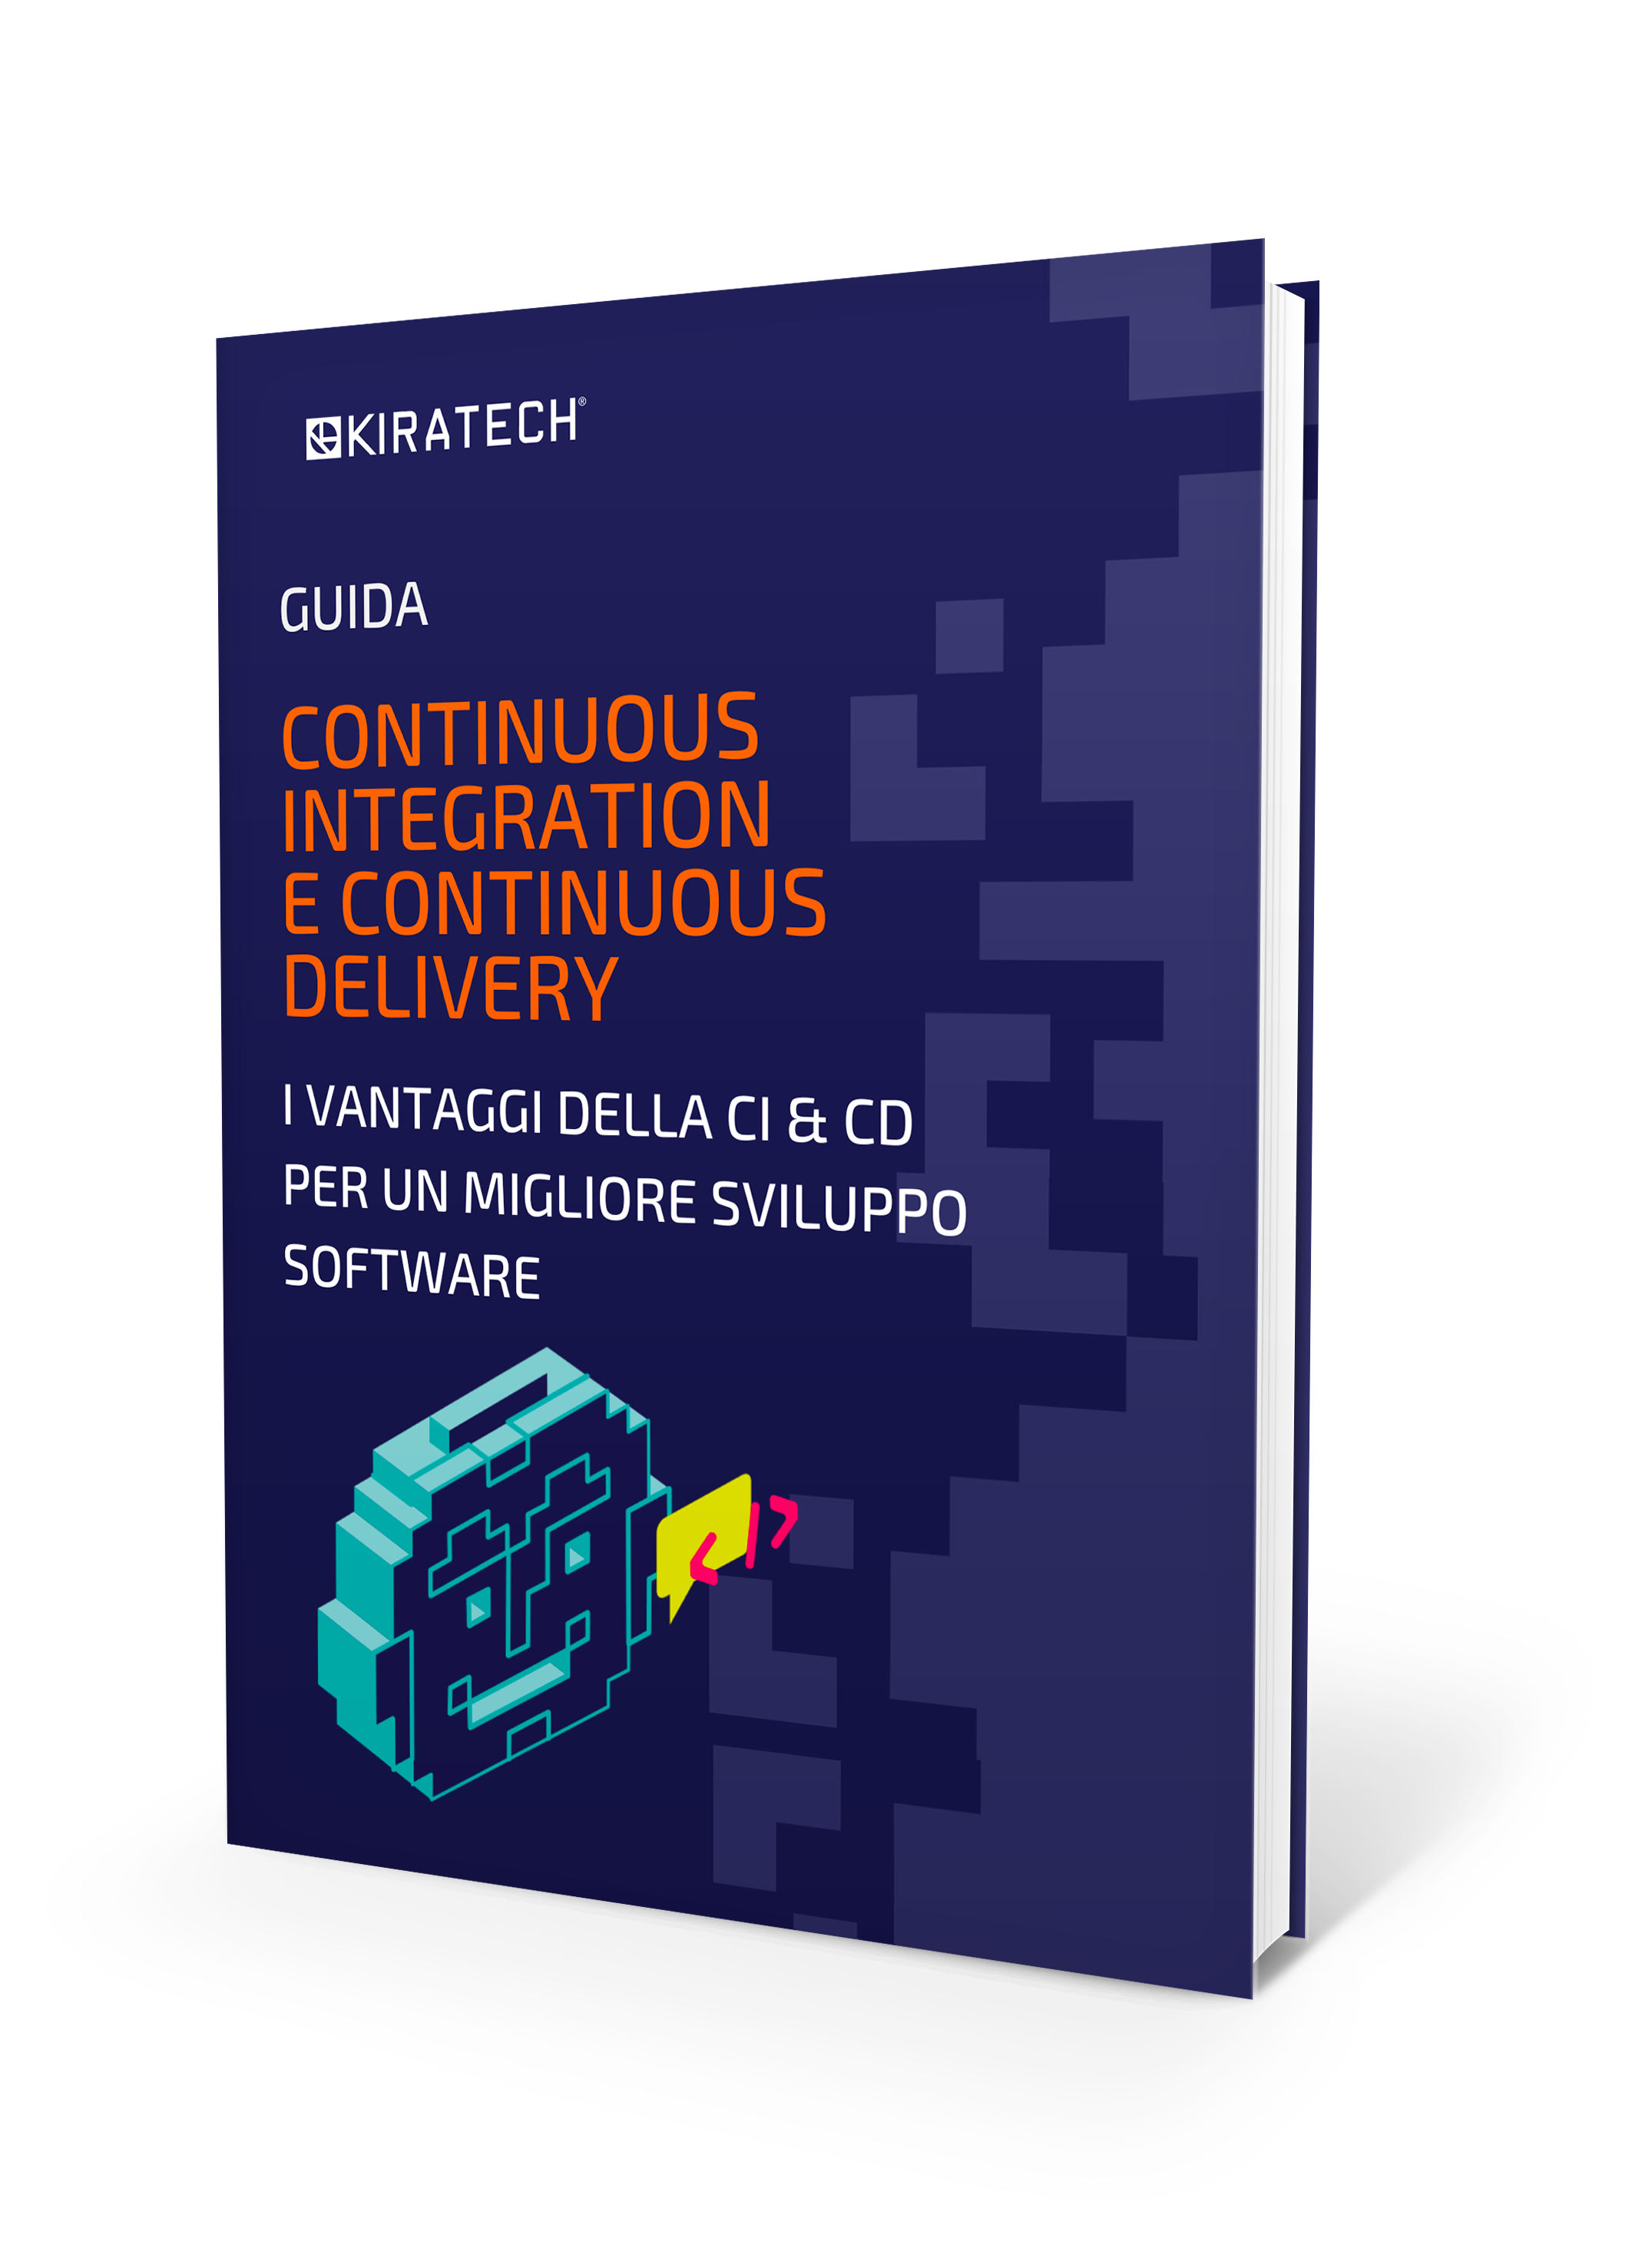 Mock up guida CONTINUOUS INTEGRATION CONTINUOUS DELIVERY